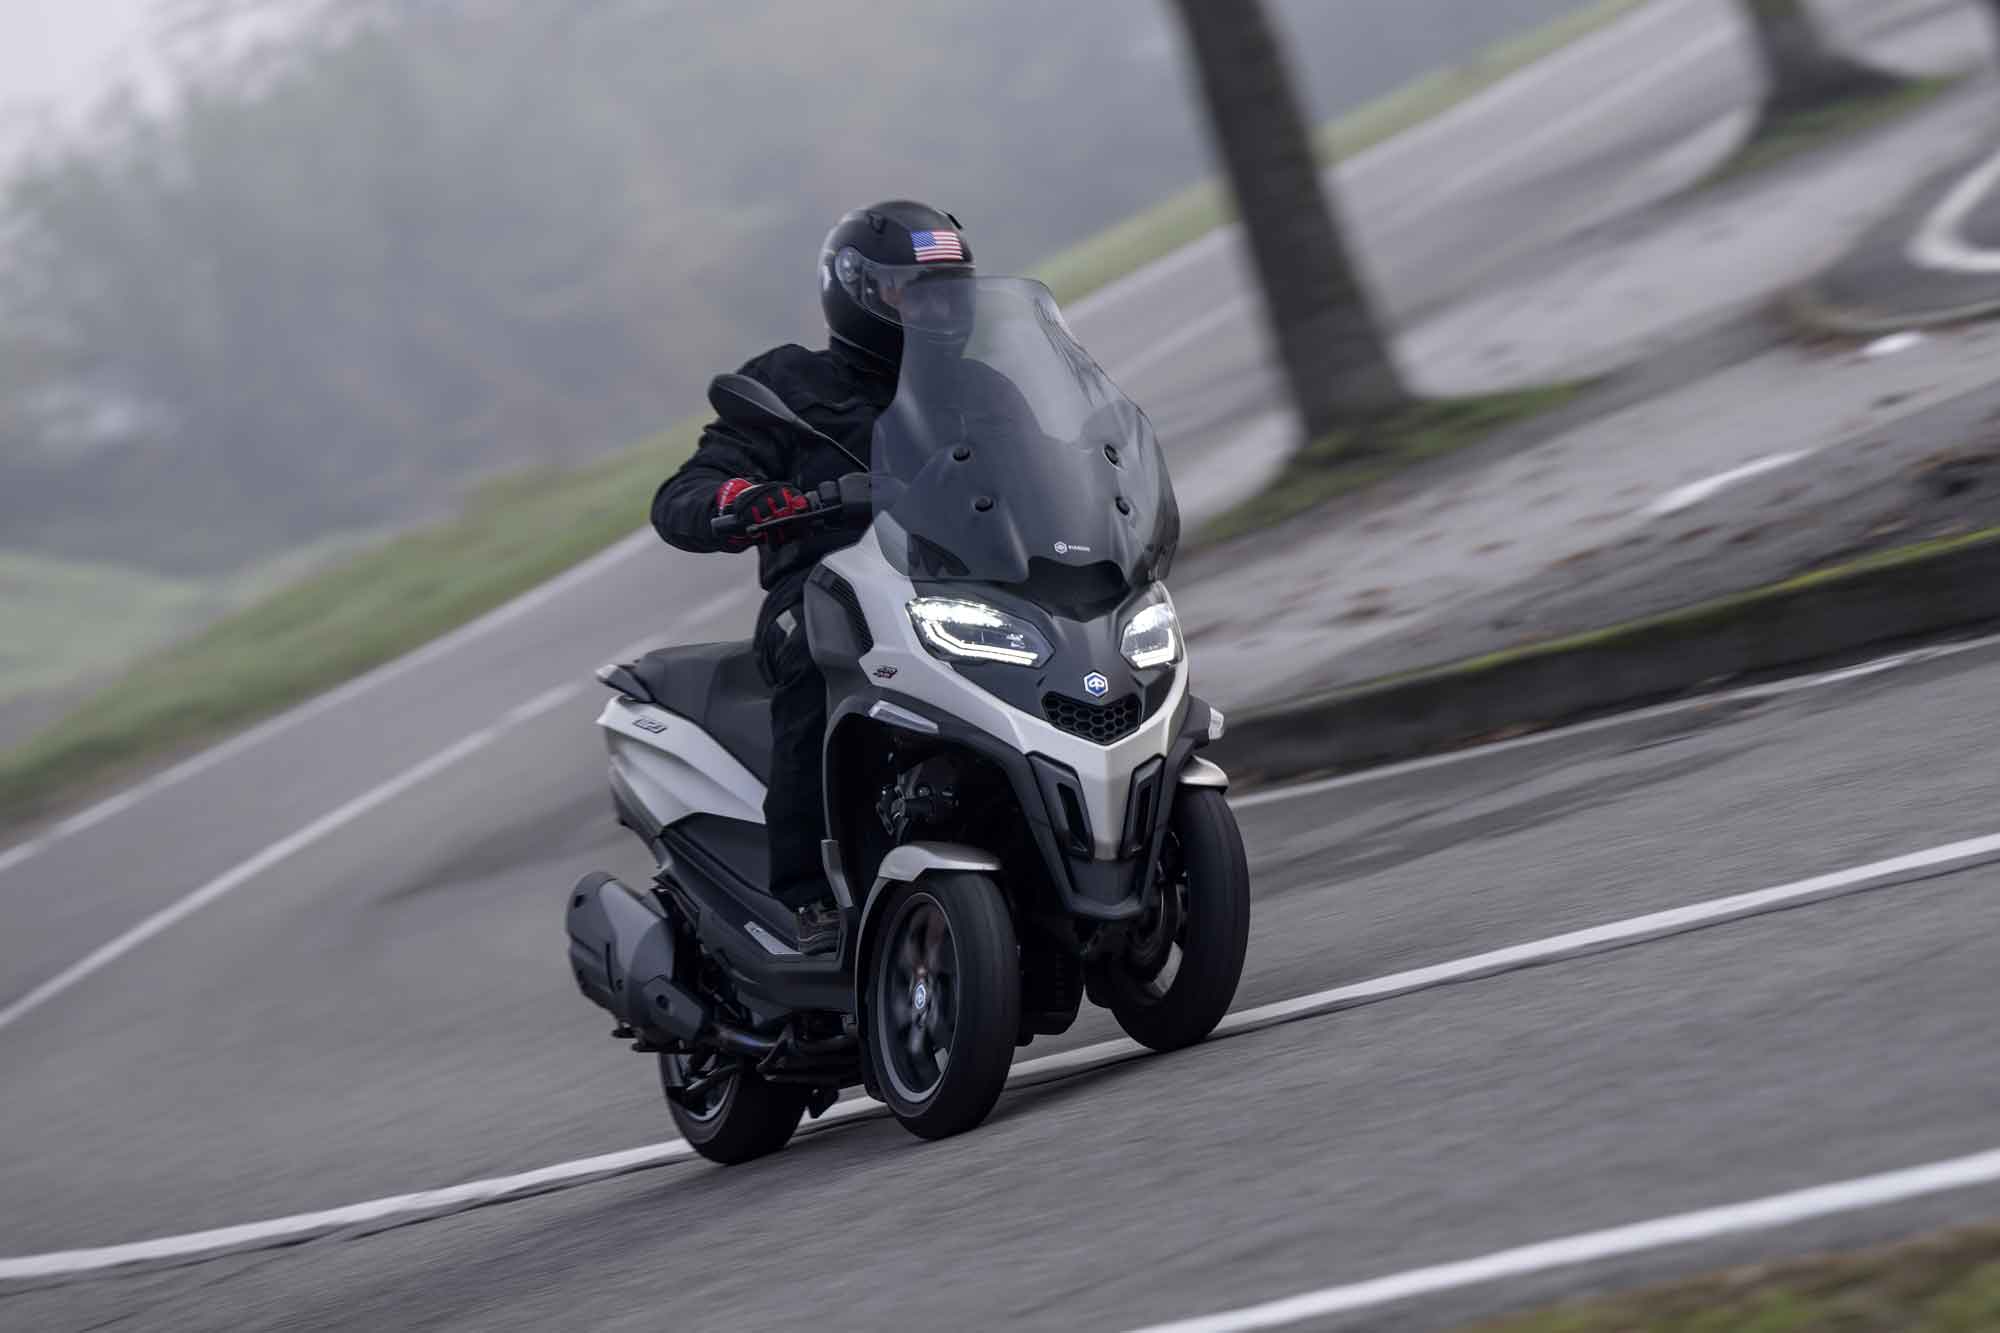 Invitere Generel tæerne Piaggio MP3 530 HPE Exclusive First Ride | Cycle World